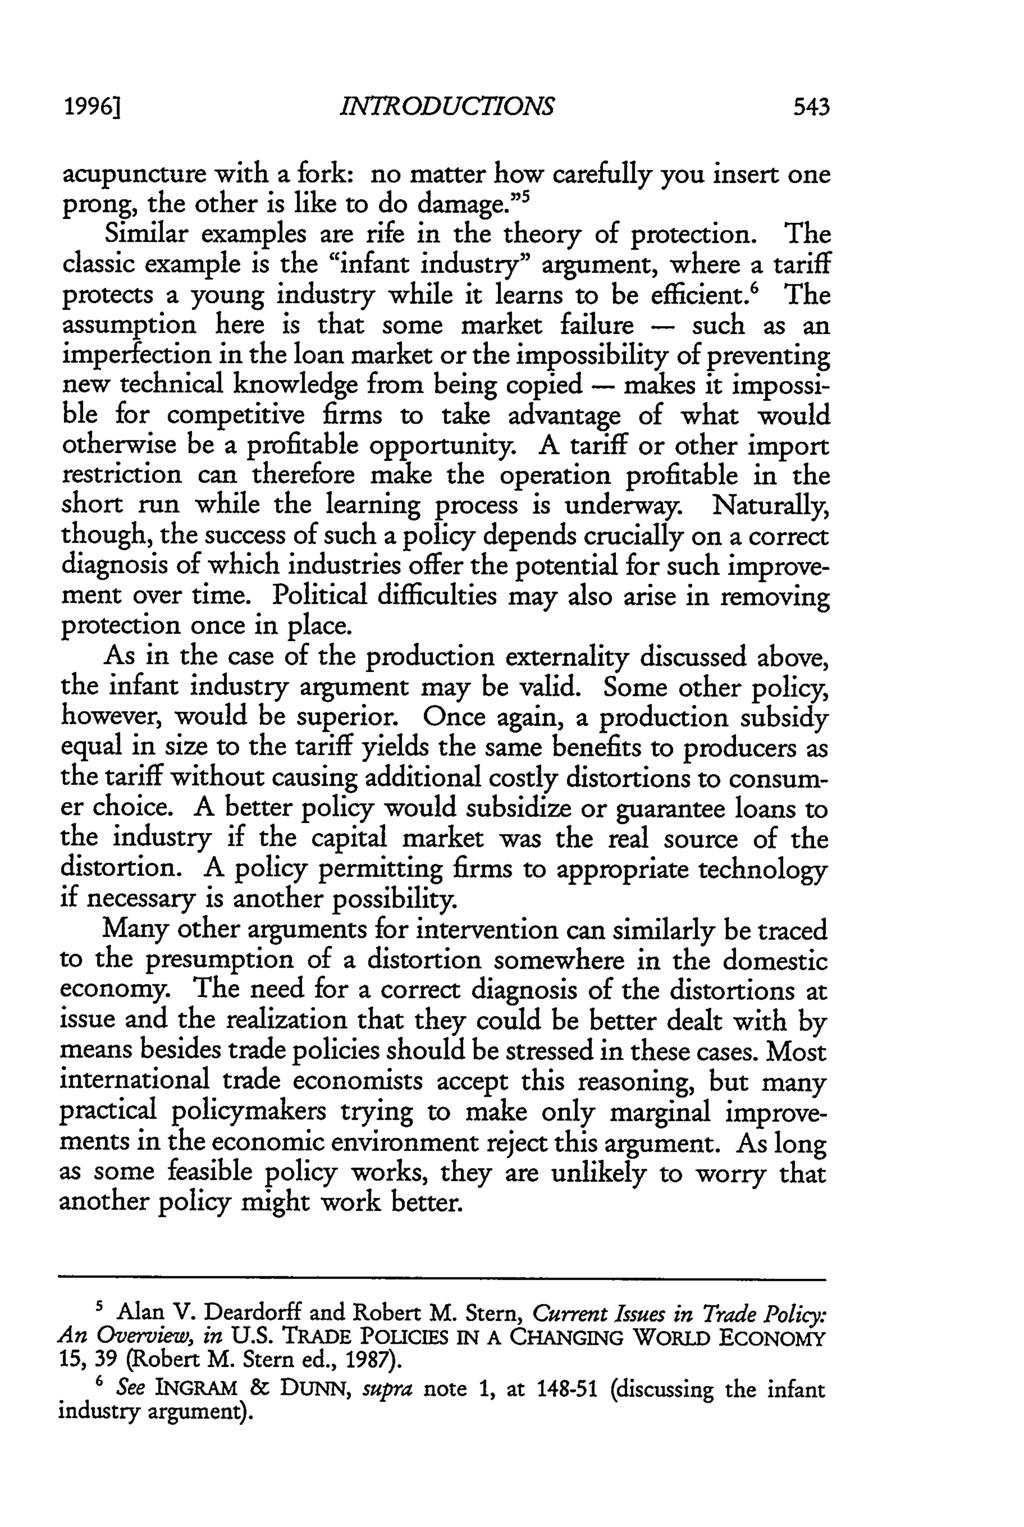 1996] INTRODUCTIONS acupuncture with a fork: no matter how carefully you insert one prong, the other is like to do damage."' Similar examples are rife in the theory of protection.